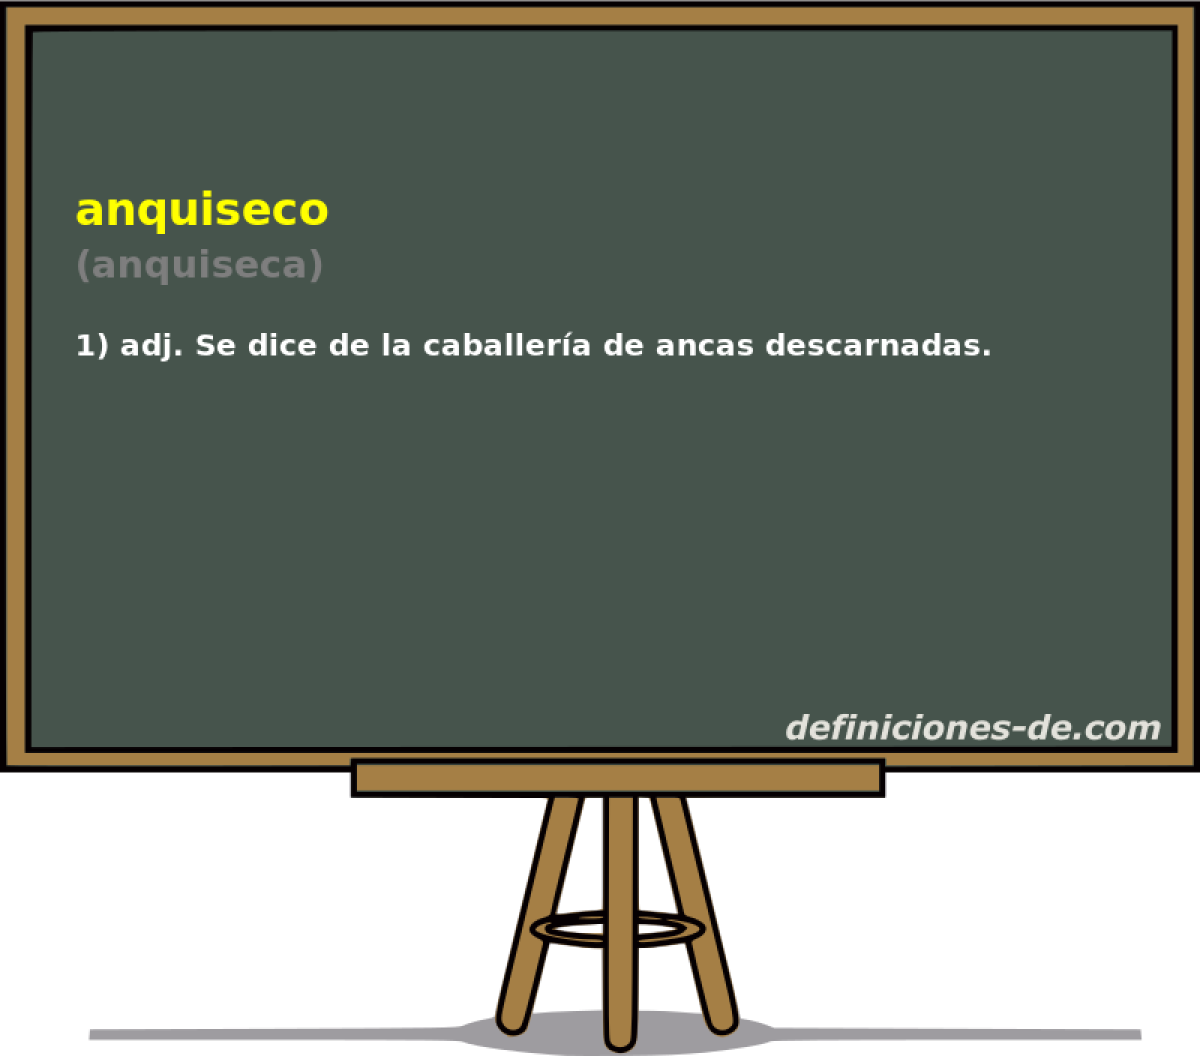 anquiseco (anquiseca)